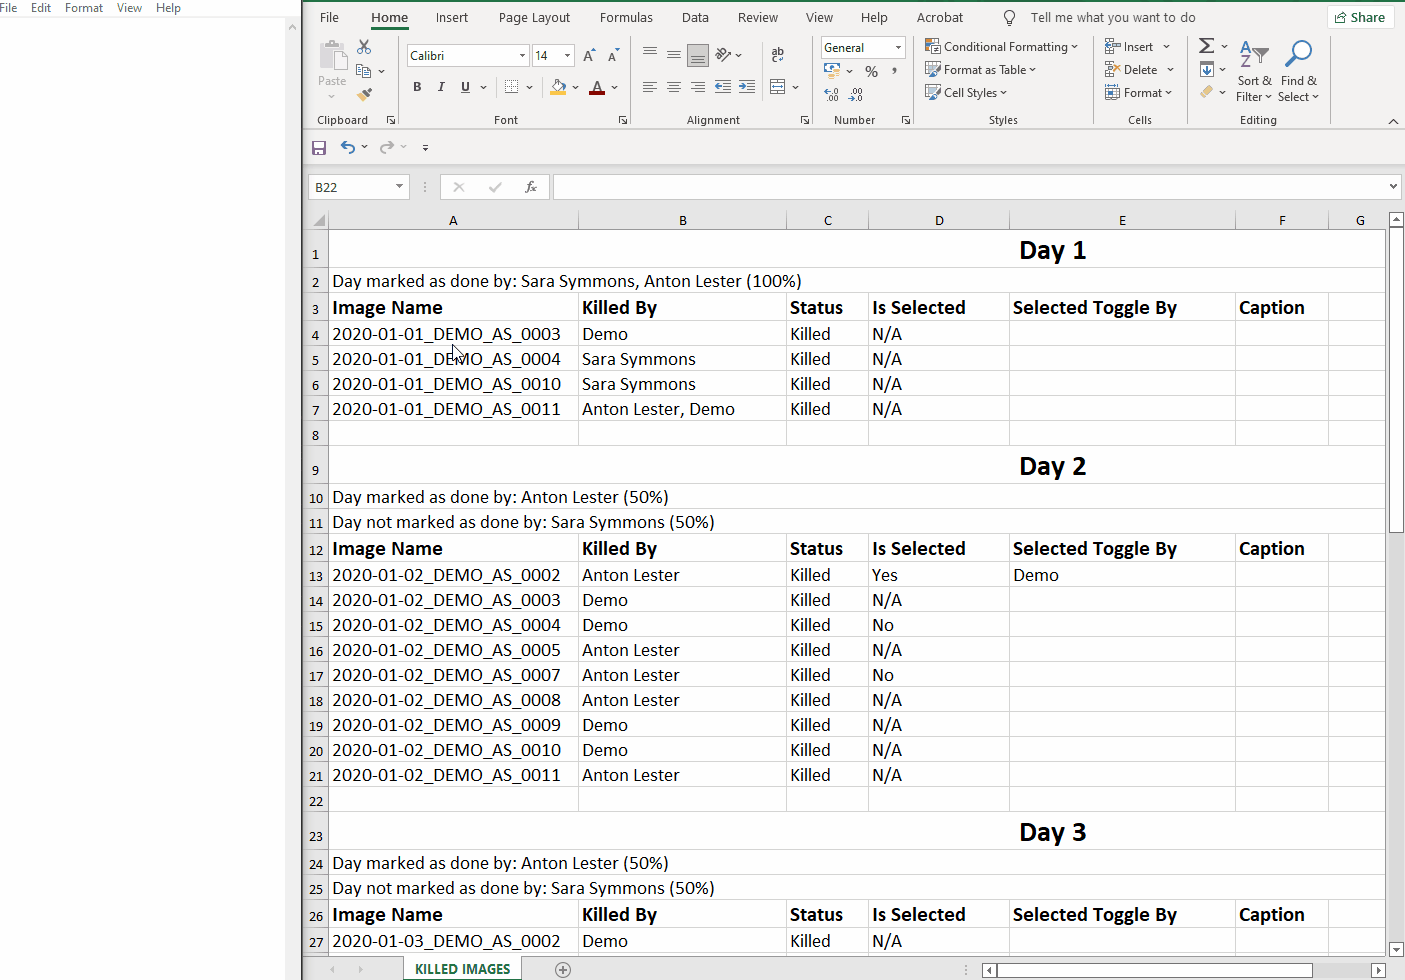  screen recording of how to copy and paste information from a spreadsheet into a Notepad file.